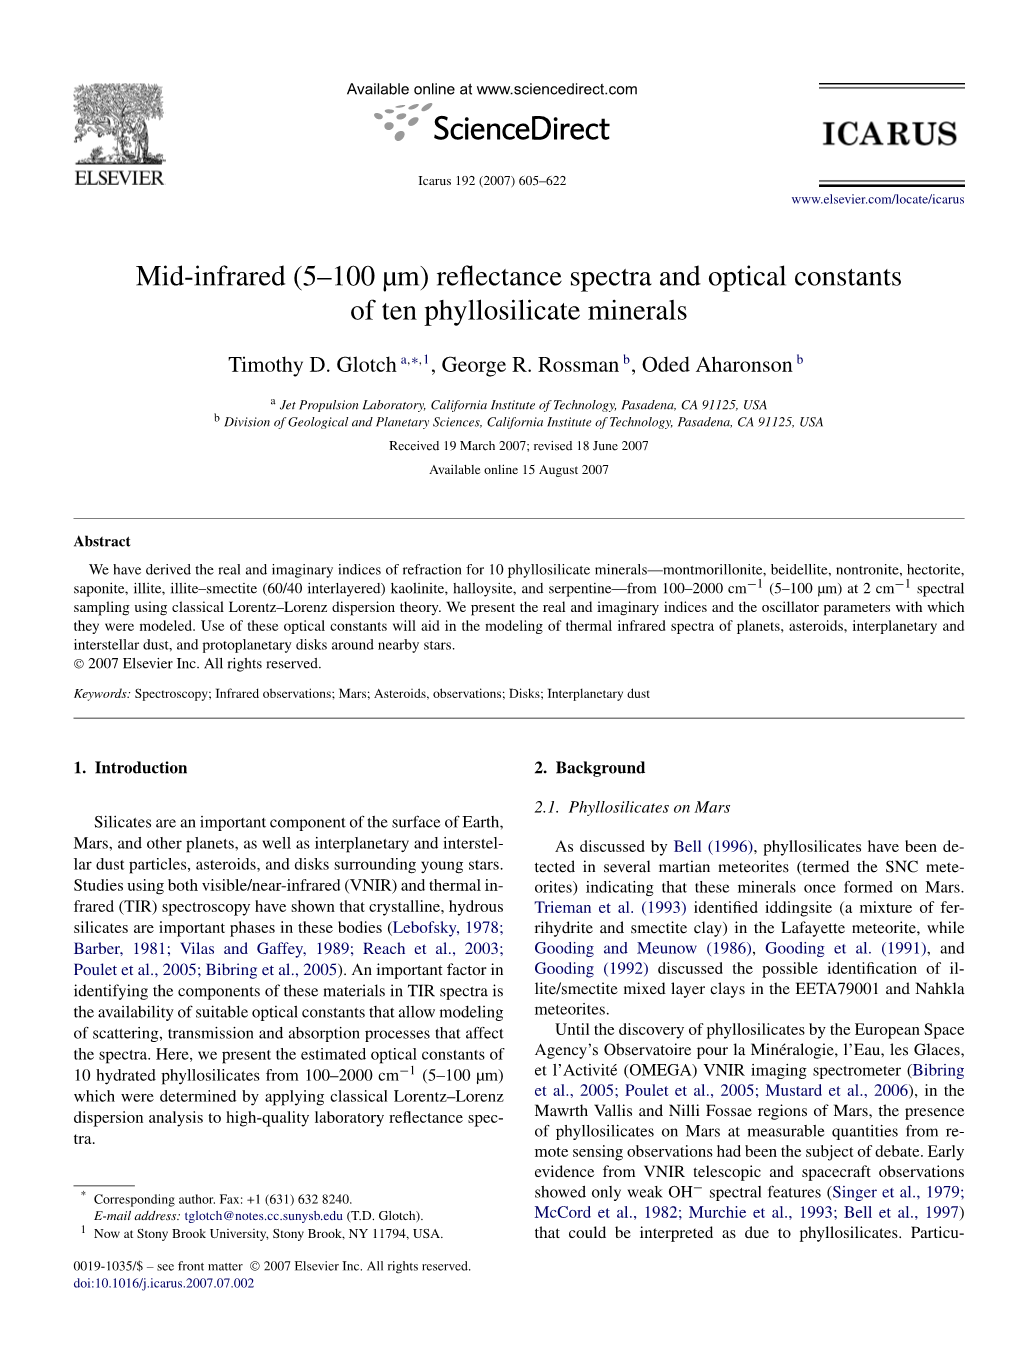 Mid-Infrared (5–100 Μm) Reflectance Spectra and Optical Constants of Ten